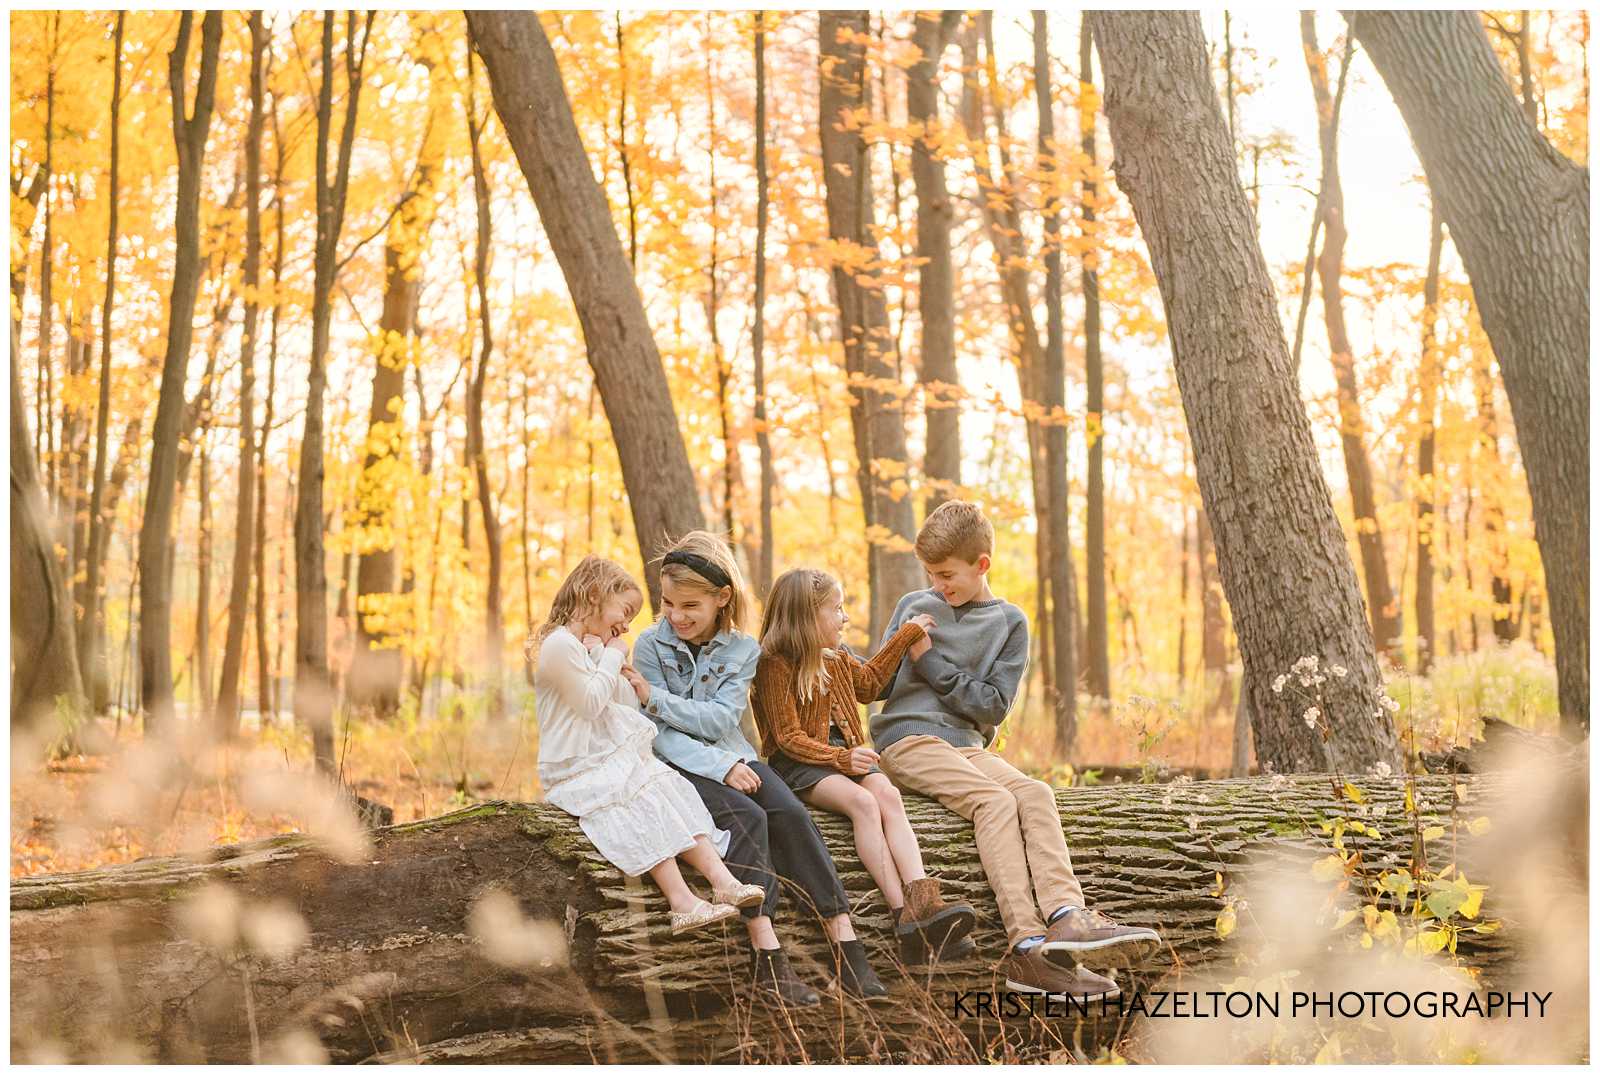 Siblings tickling each other in the fall woods